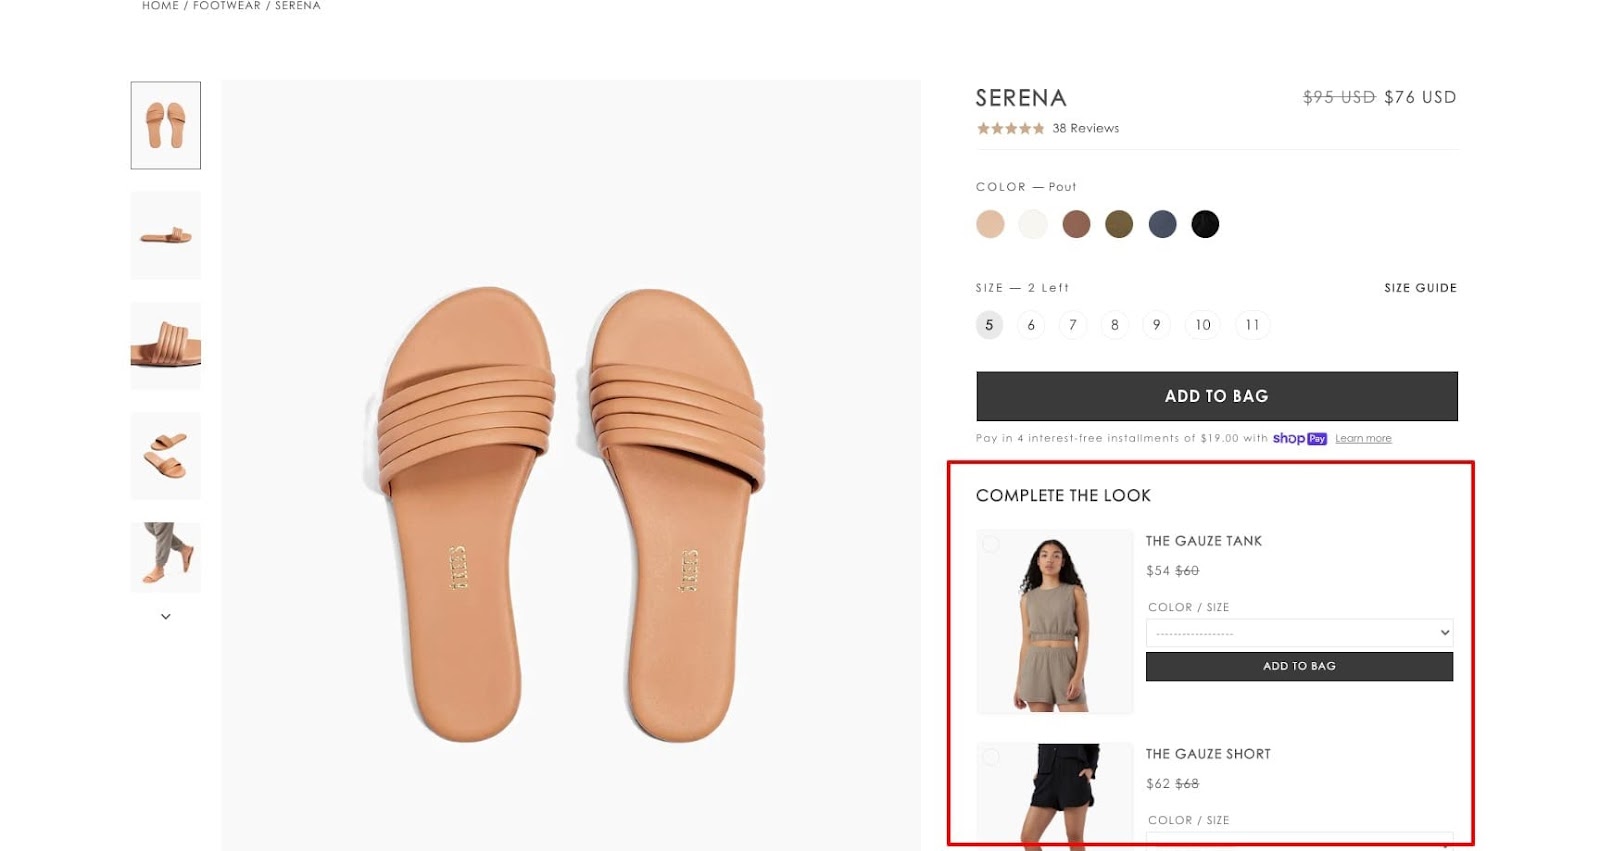 serena tkees sandals product page complete the look cross-selling tactic